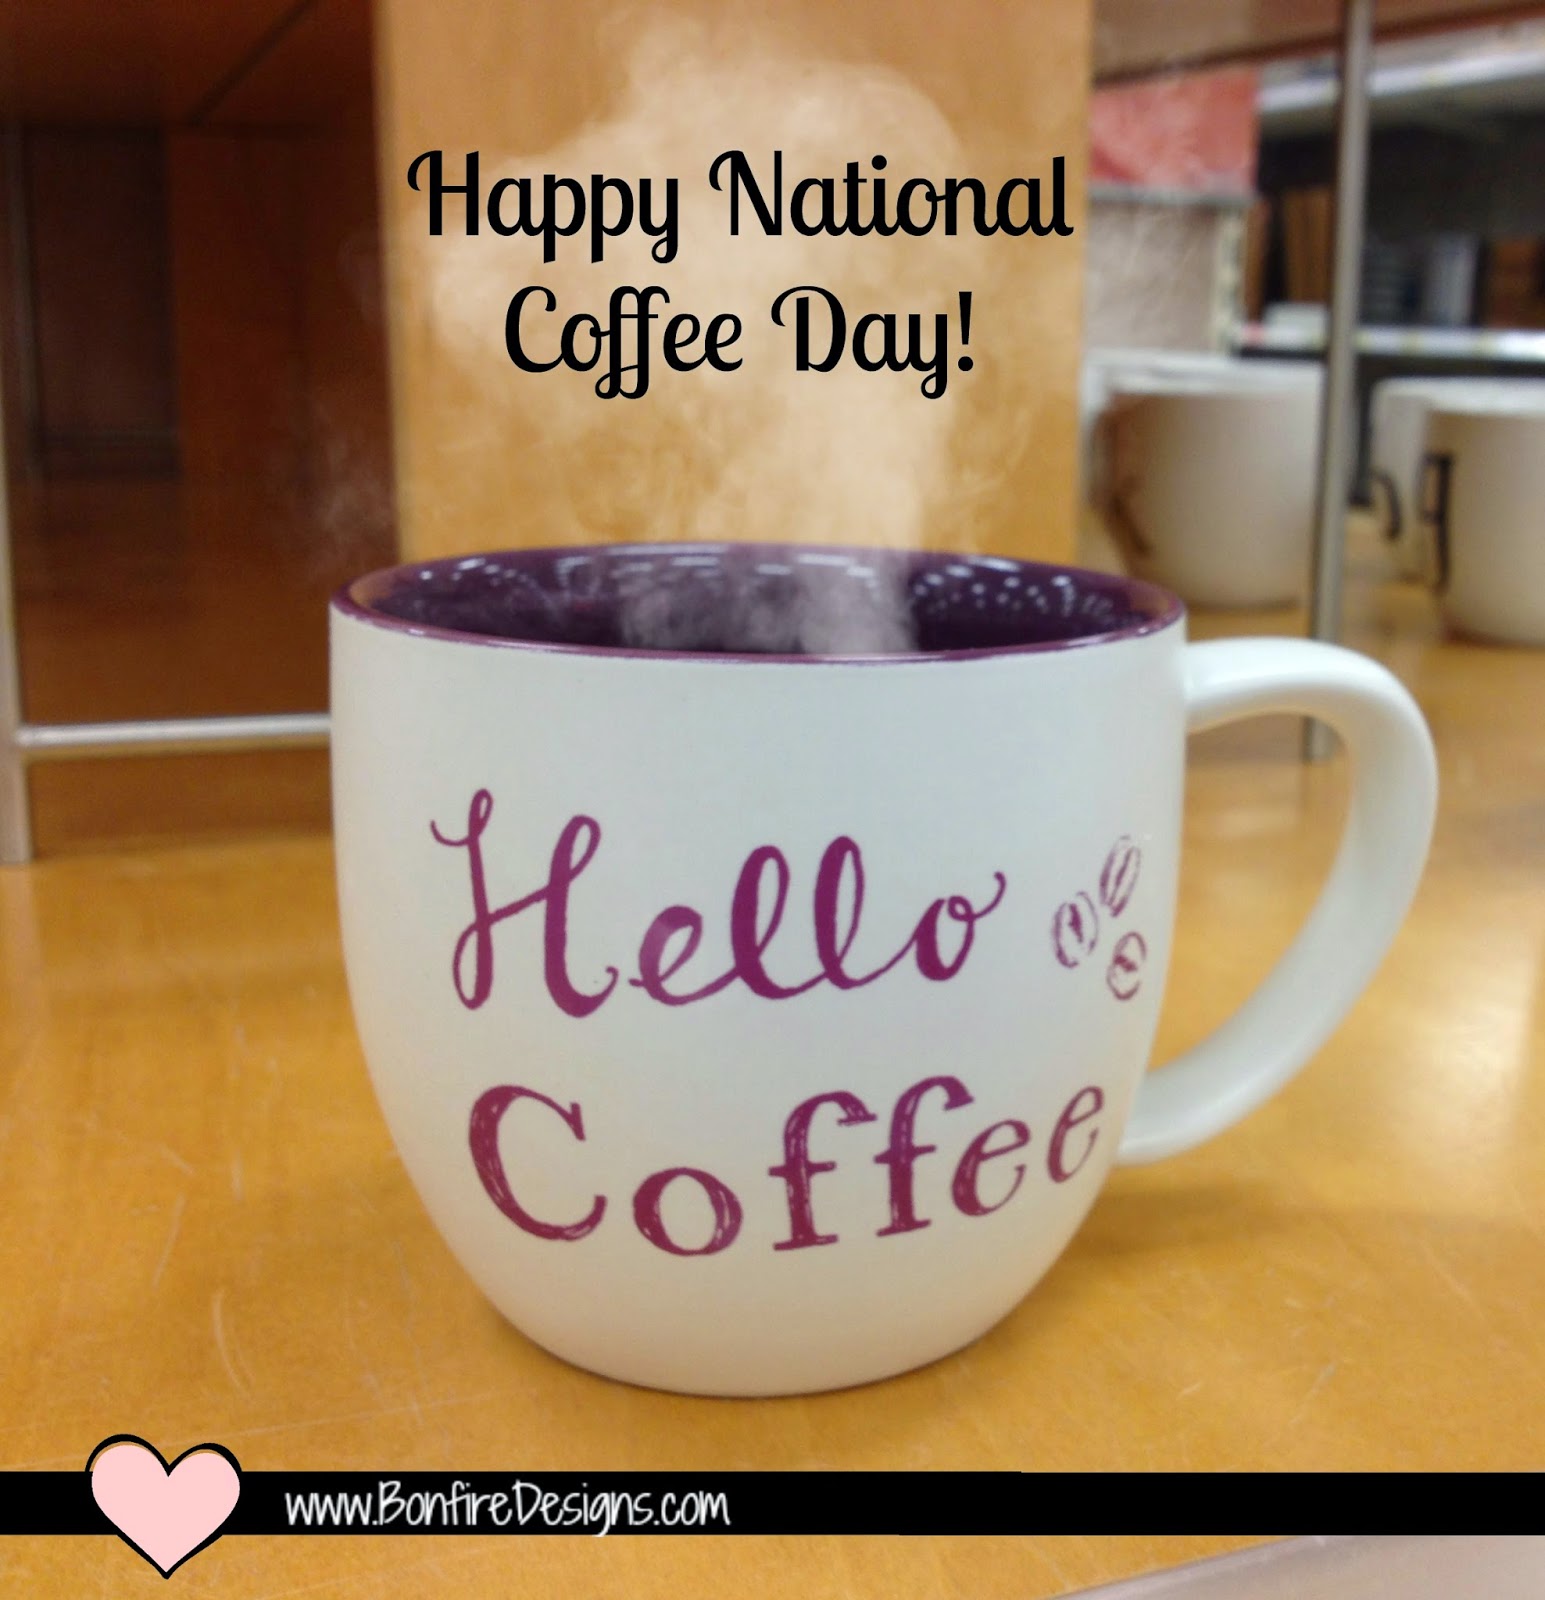  Happy National Coffee Day